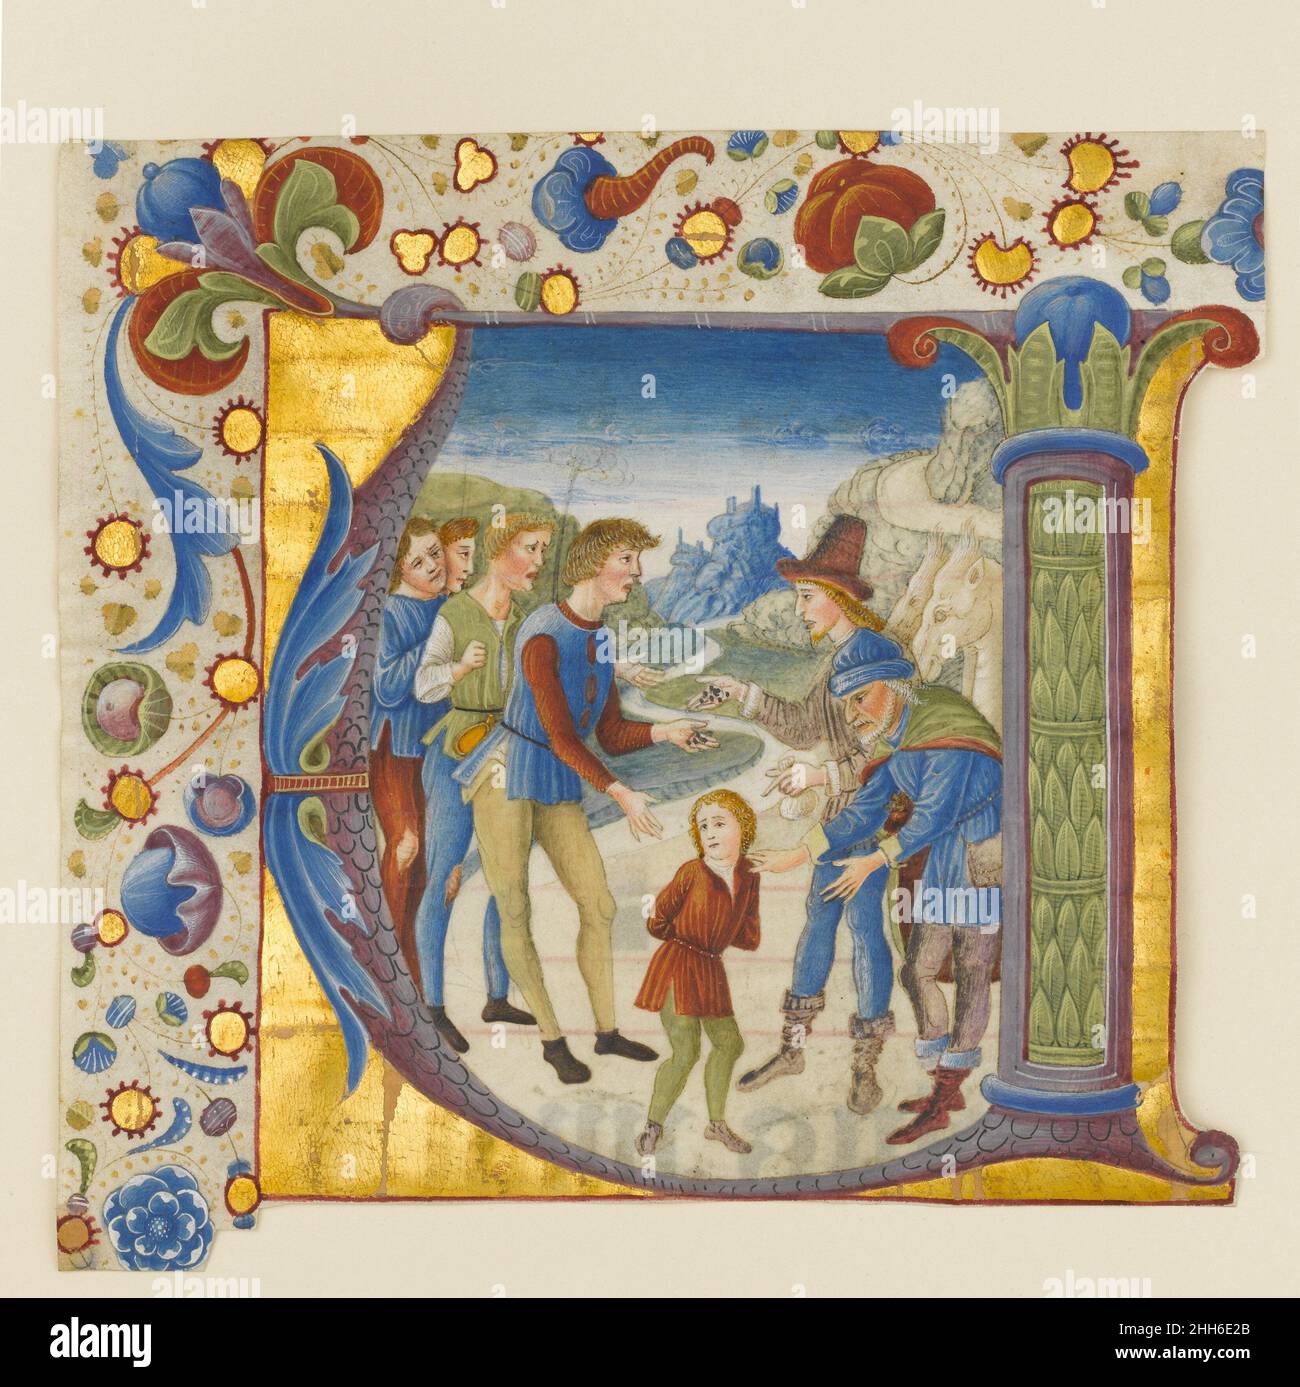 Manuscript Illumination with Joseph Sold by His Brothers in an Initial V, from an Antiphonary ca. 1490 Giovanni Pietro da Cemmo Italian. Manuscript Illumination with Joseph Sold by His Brothers in an Initial V, from an Antiphonary  468925 Stock Photo